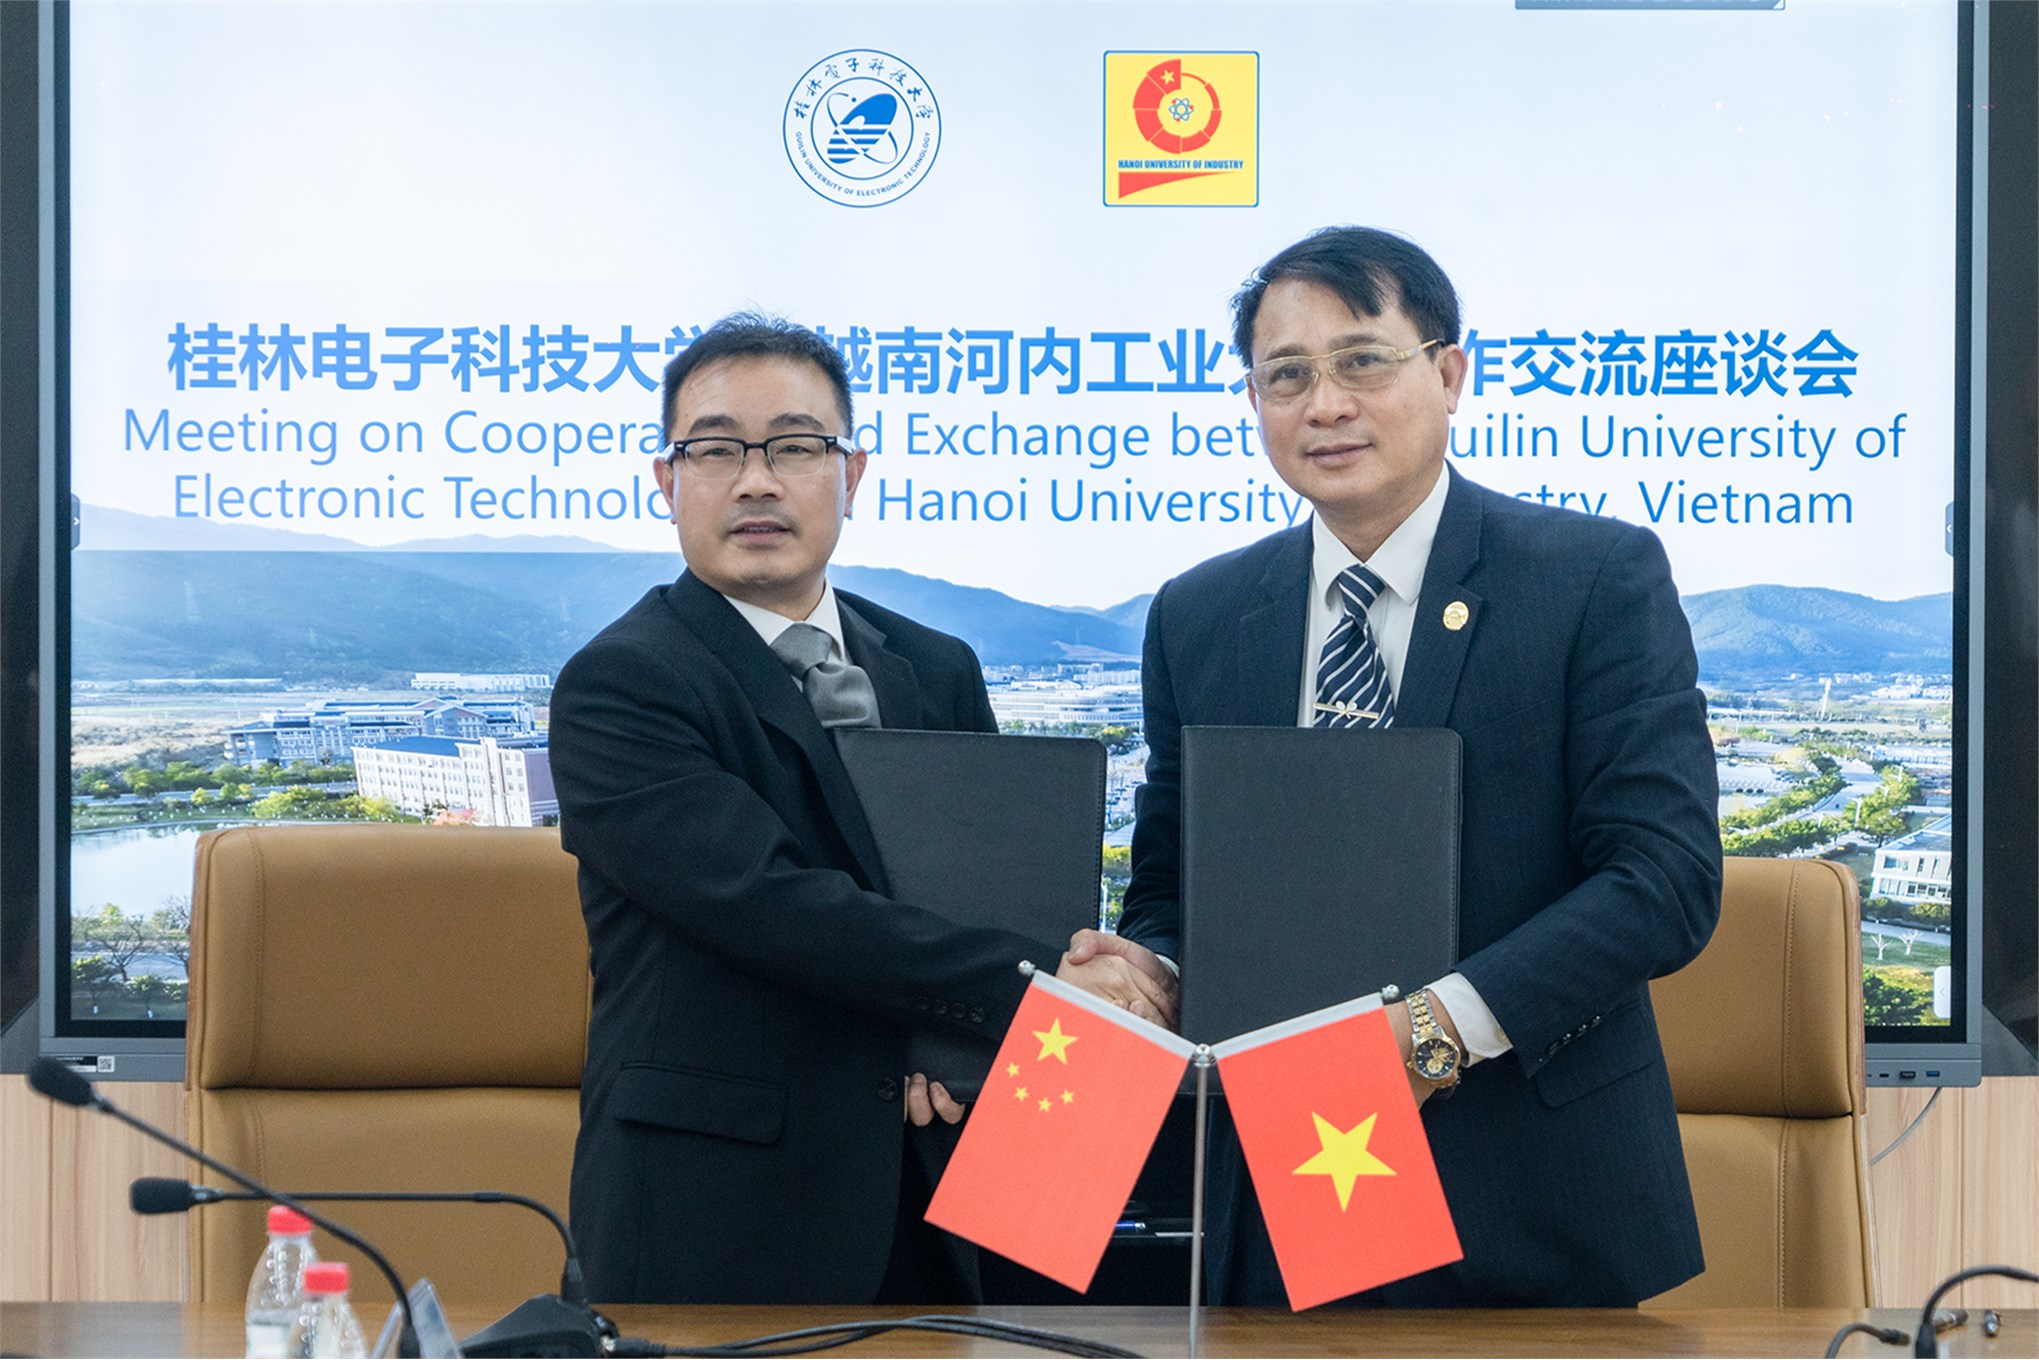 Hanoi University of Industry promotes educational cooperation with universities in China